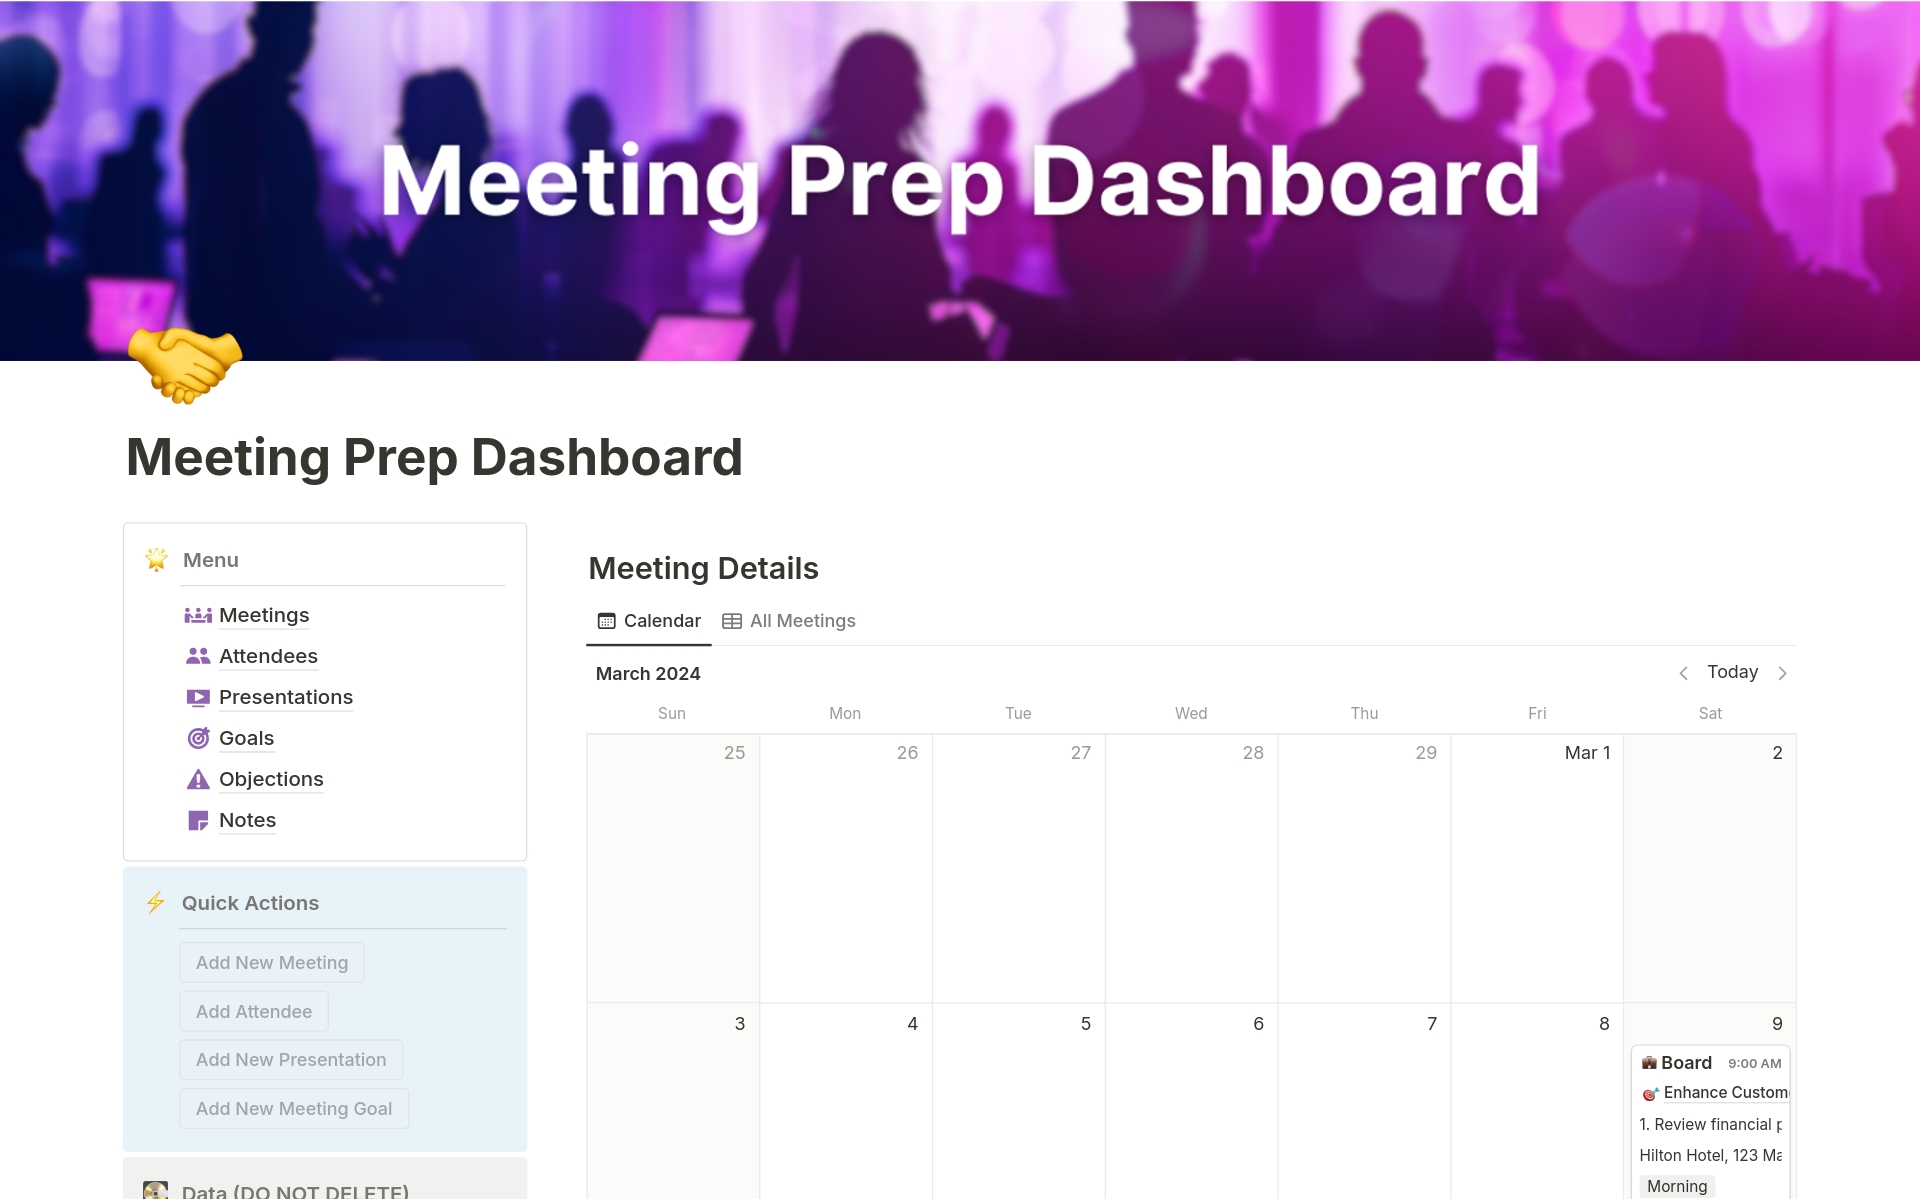 Transform the way you prepare for crucial meetings with our Business Meeting Preparation Template. Streamline organization, coordination, and goal achievement to make every meeting a success.